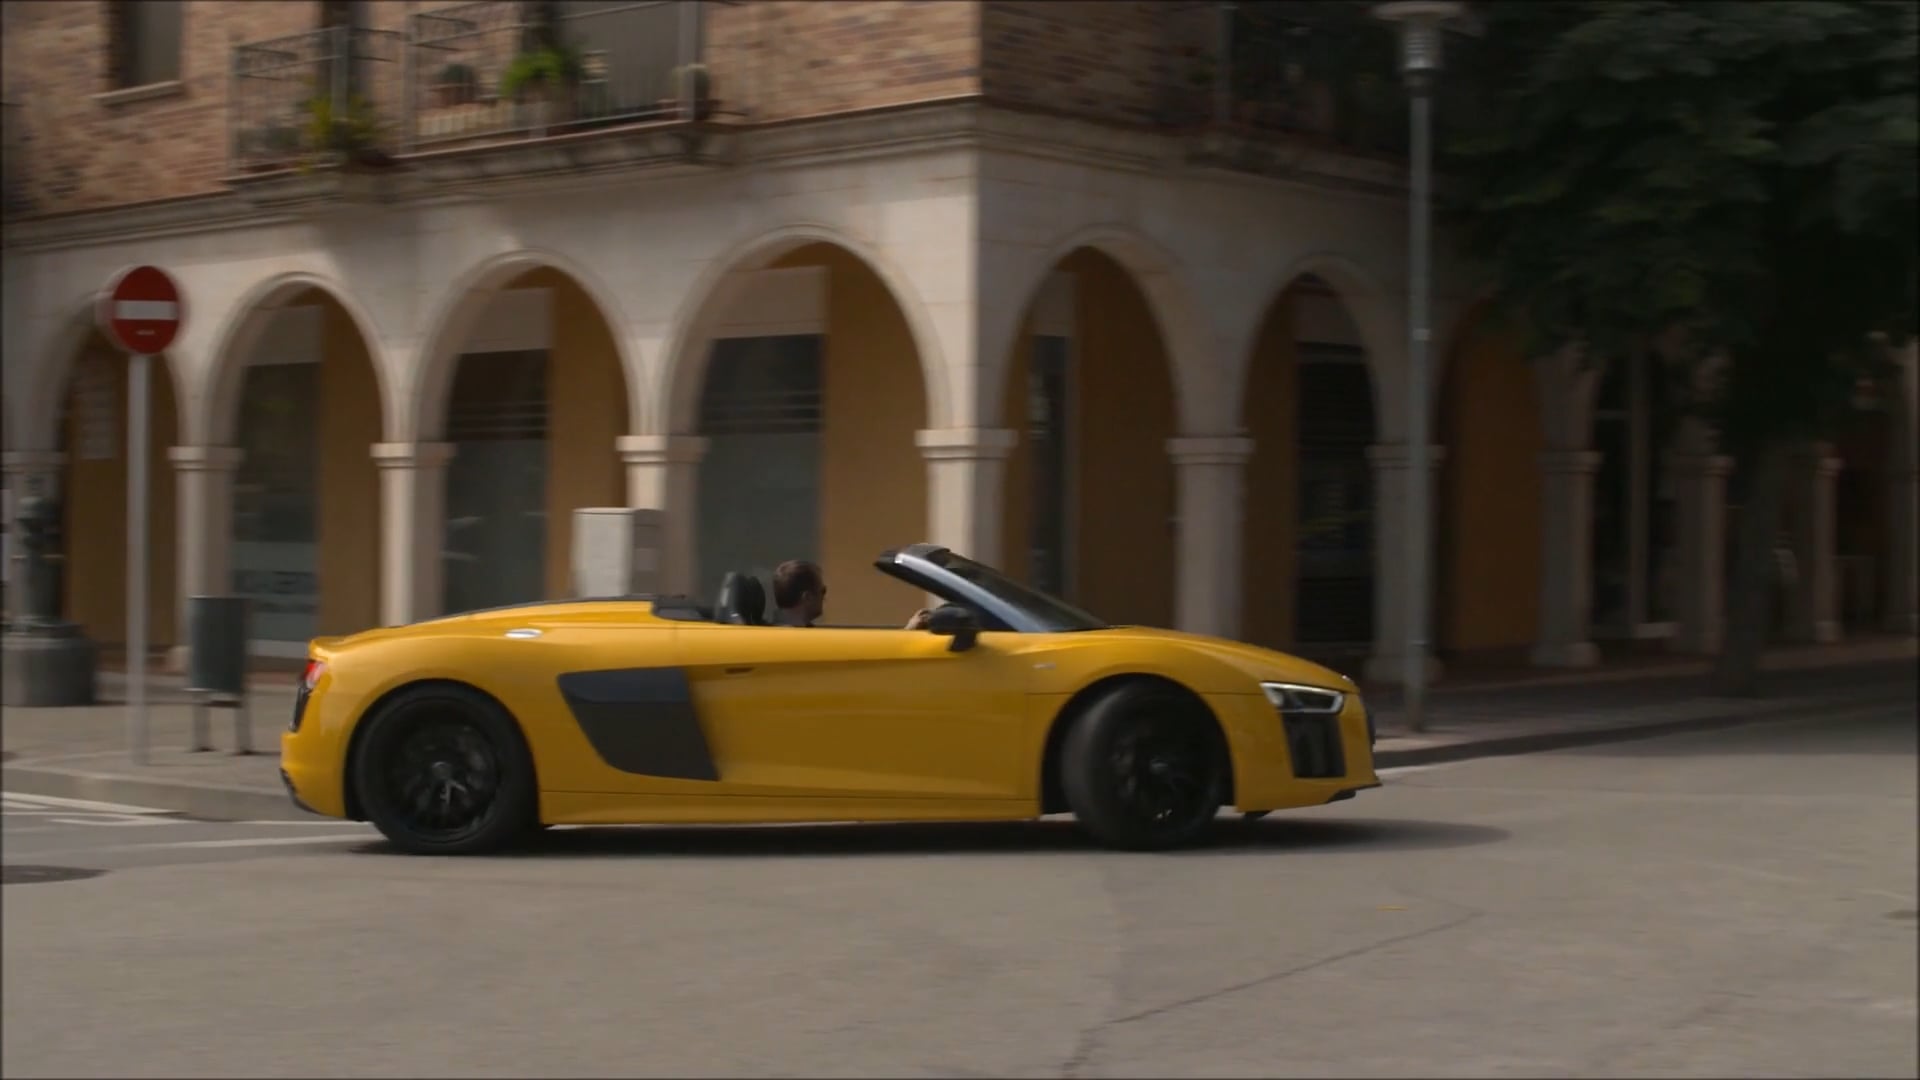 Overview: Audi R8 V10 Spyder (Yellow)